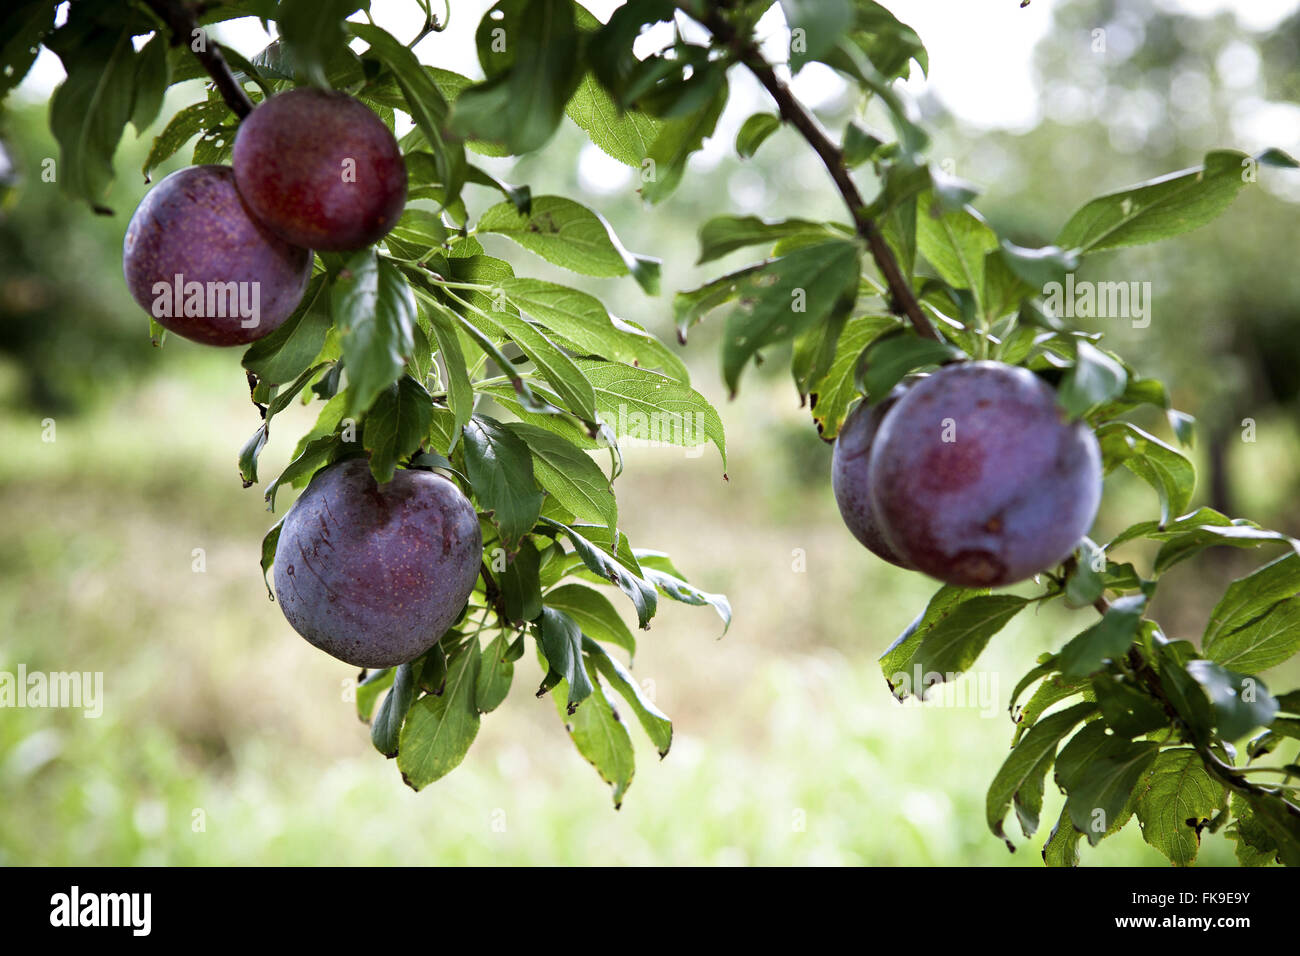 Plantation of plums in the rural town of ItaiÛpolis Stock Photo